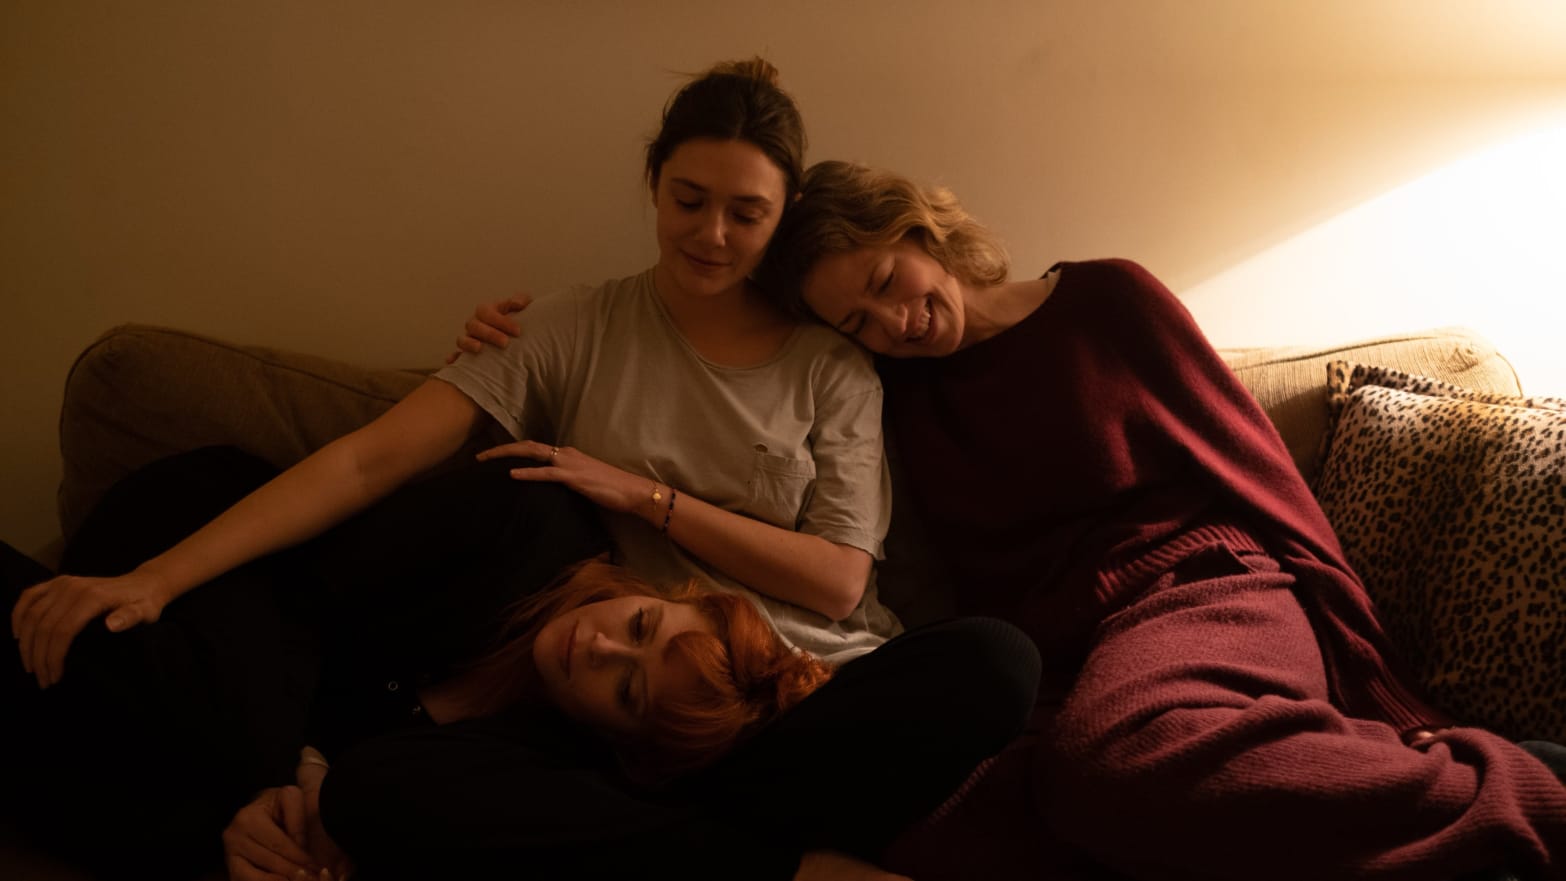 A photo still of Natasha Lyonne, Elizabeth Olsen, and Carrie Coon in 'His Three Daughters'